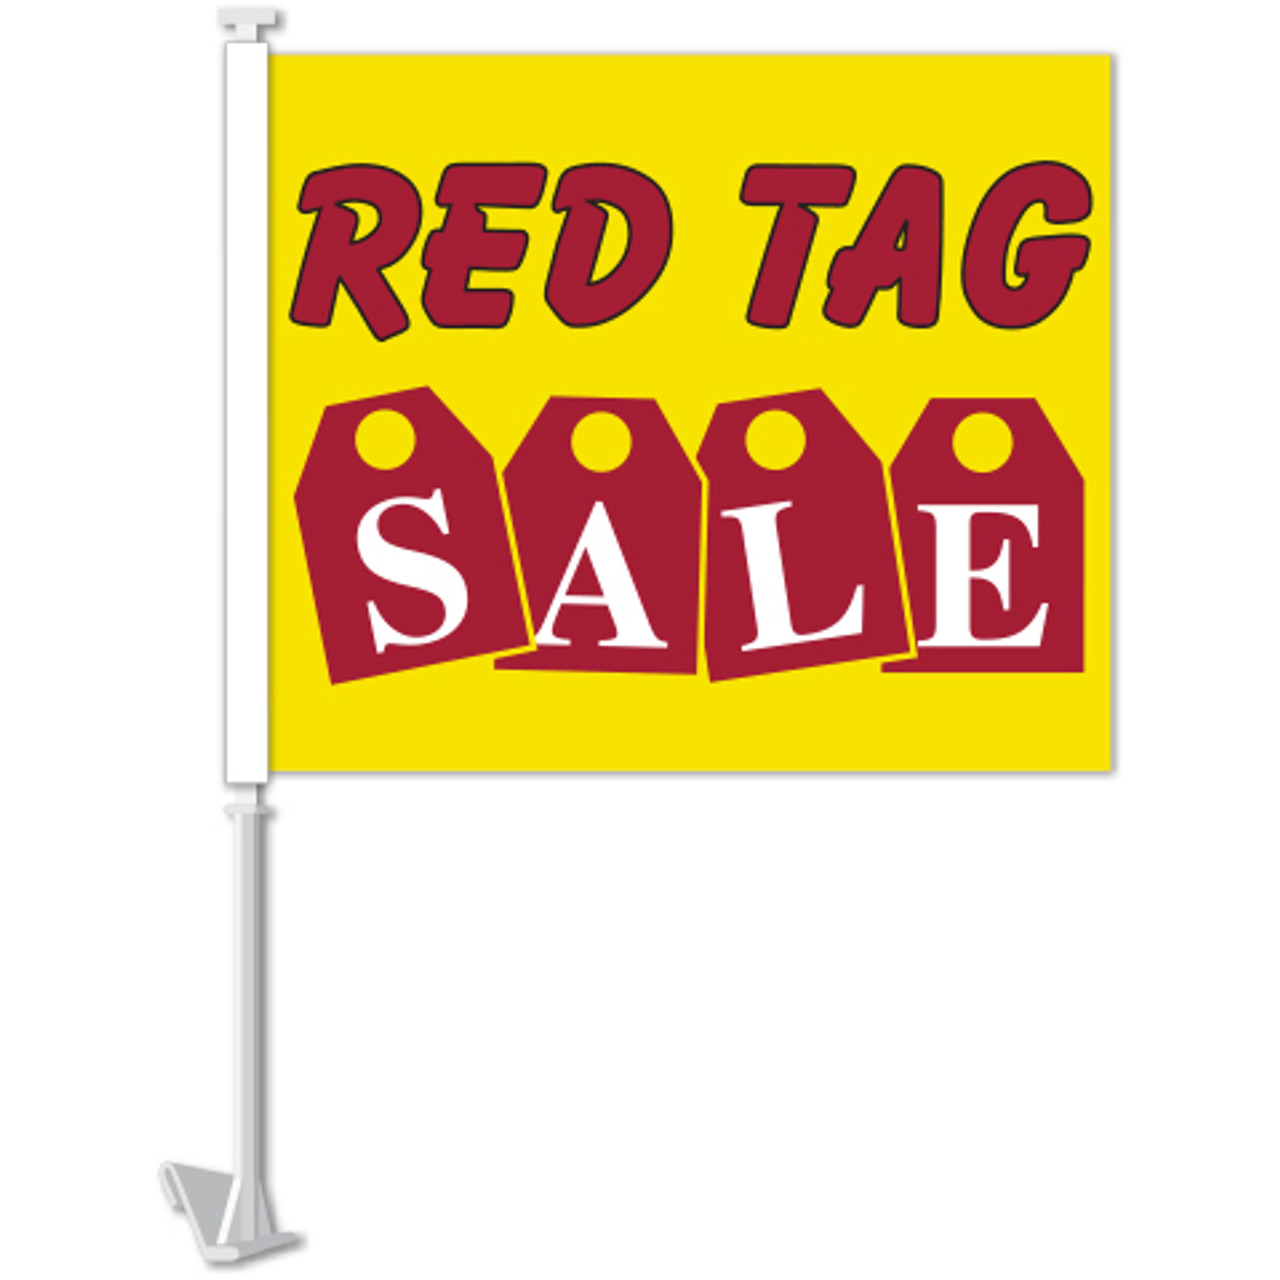 Standard Clip-On Flag - Red Tag Sale - Qty. 1